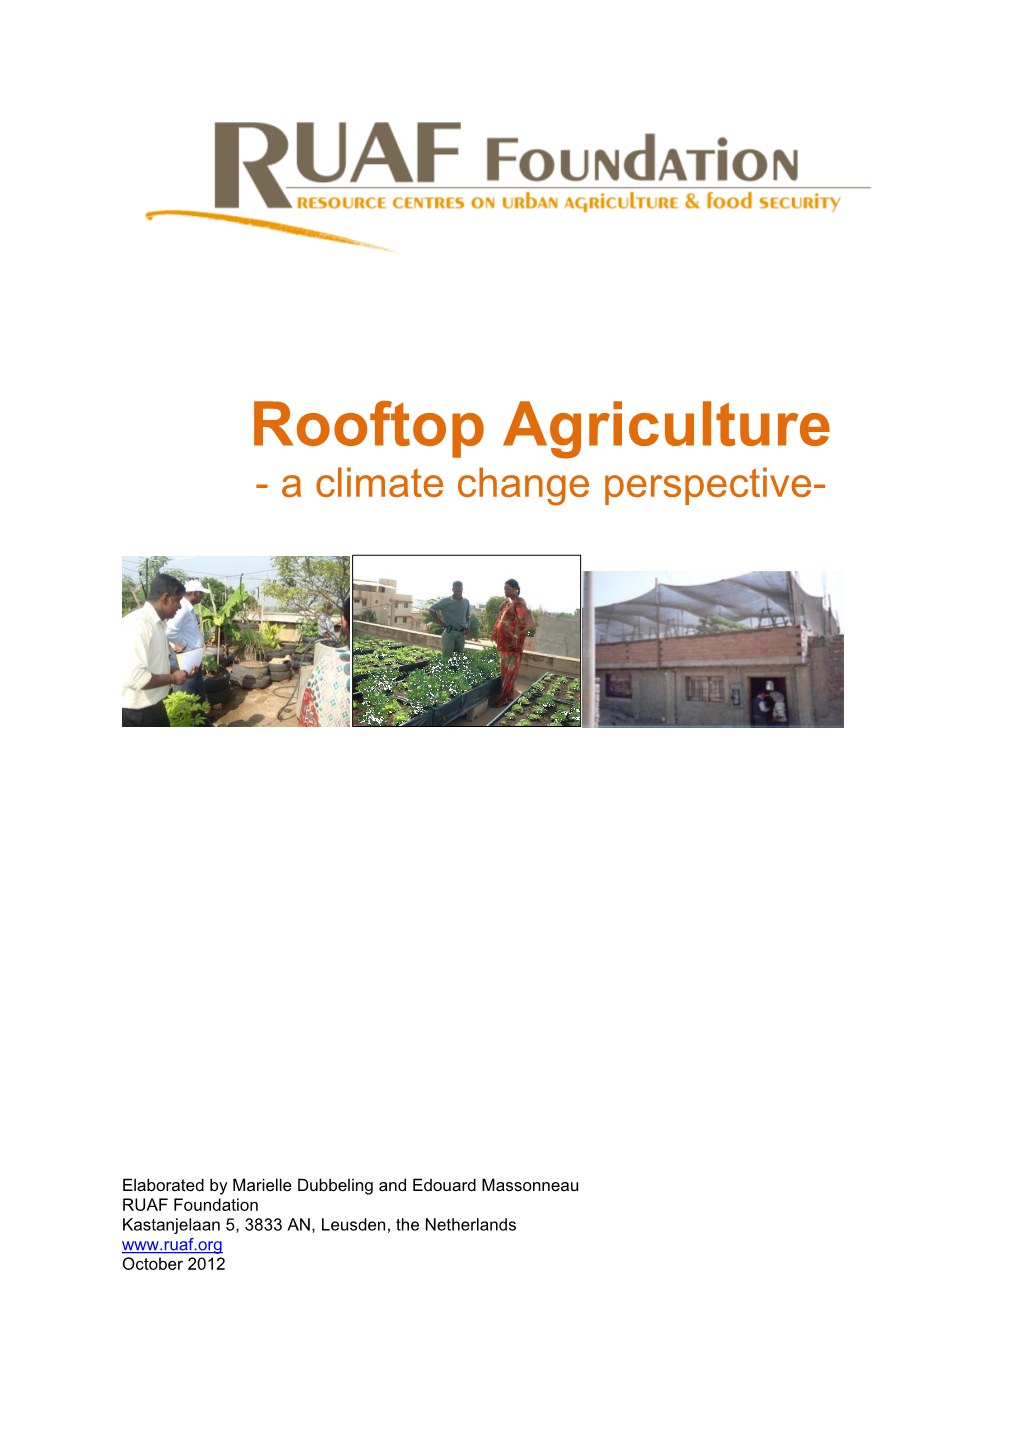 Rooftop Agriculture - a Climate Change Perspective